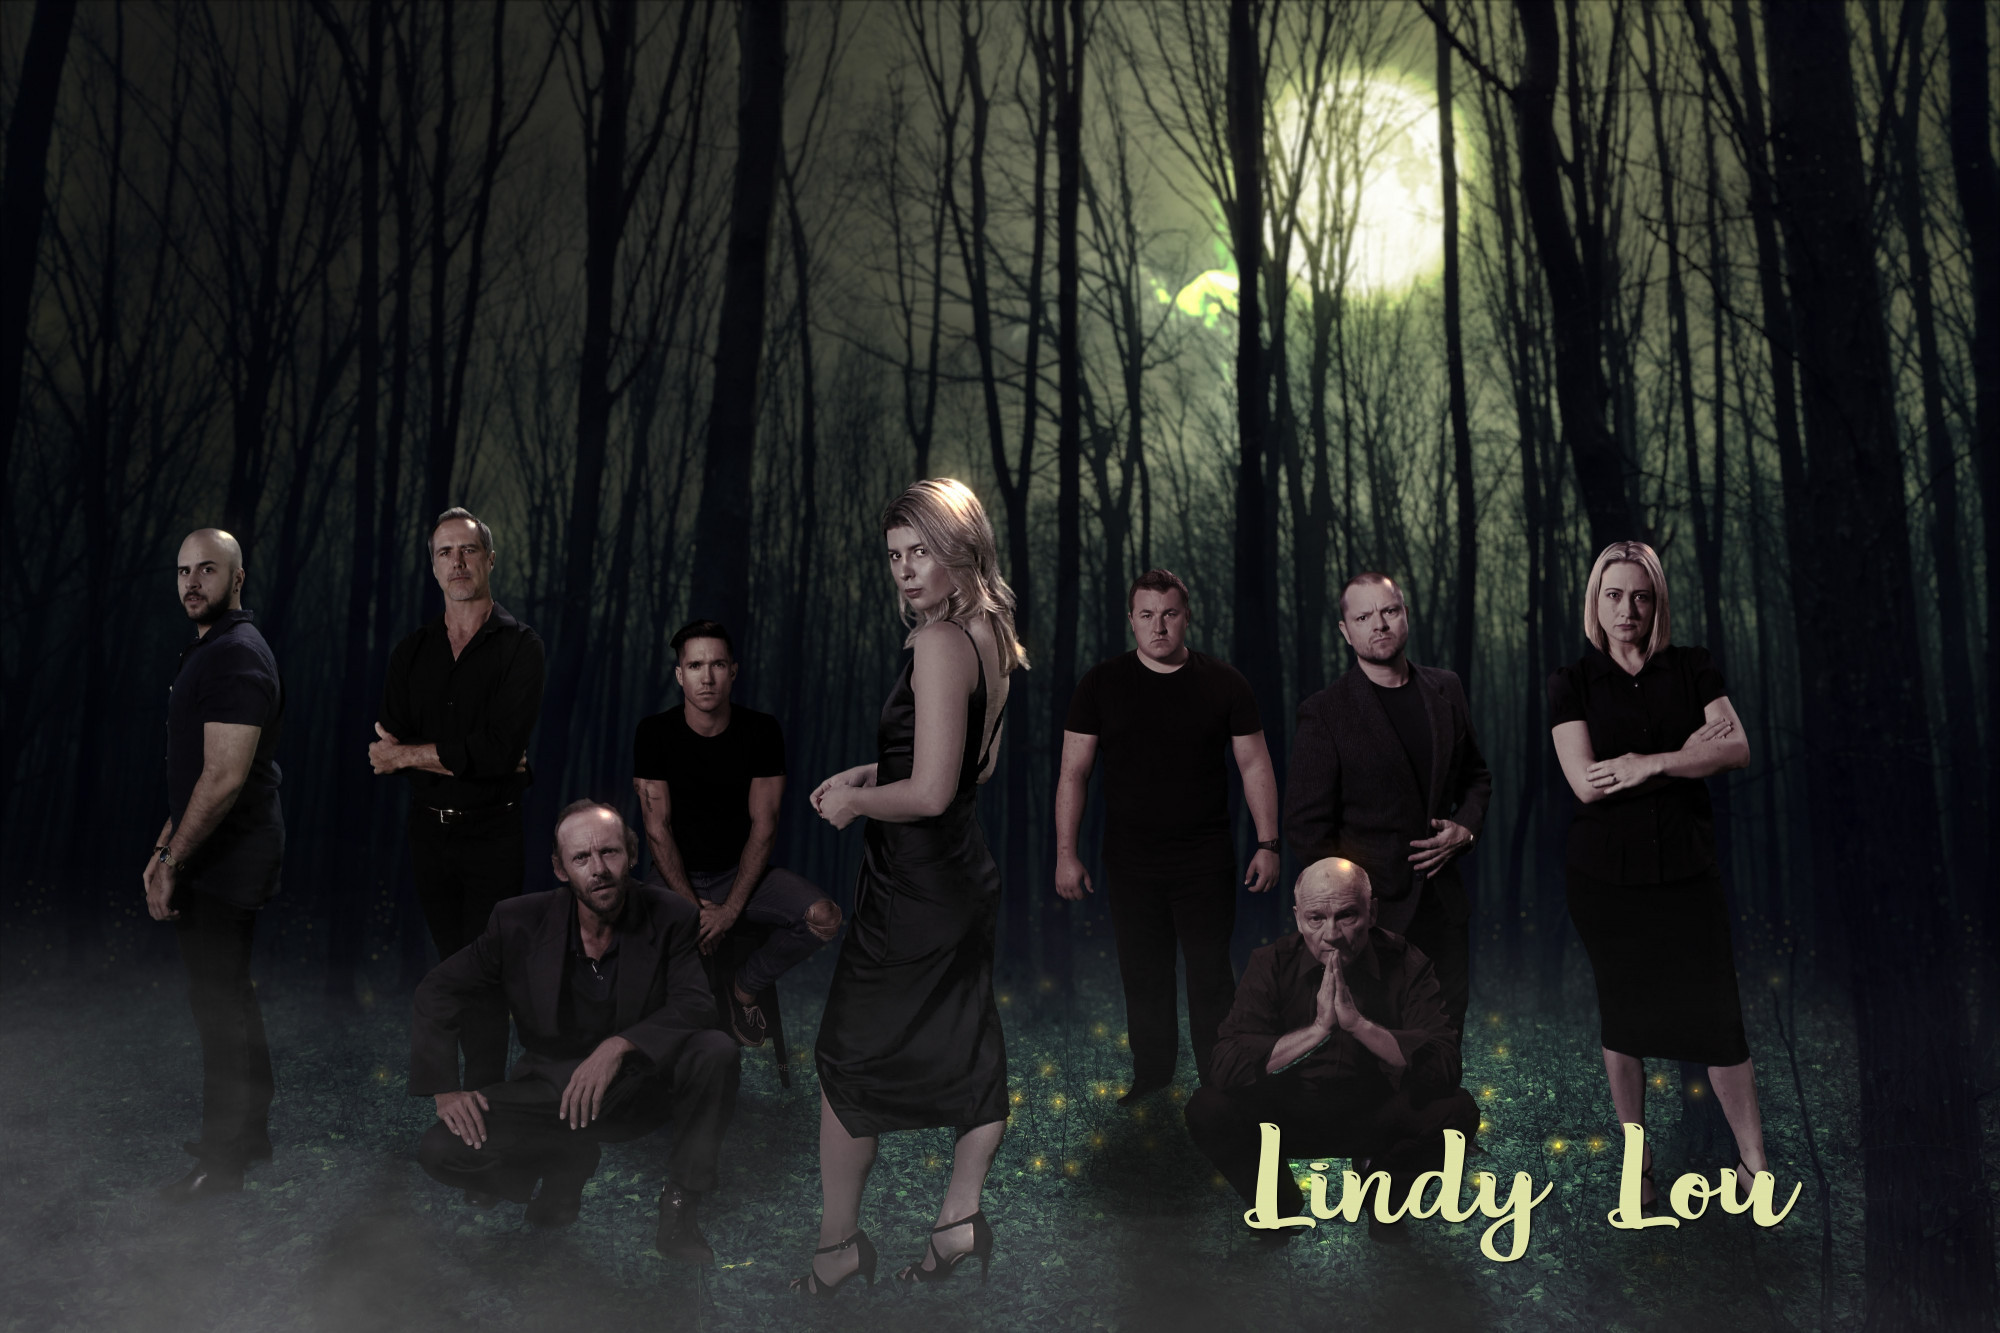 The cast for the new movie “Lindy Lou” which begins filming in Mareeba this week.